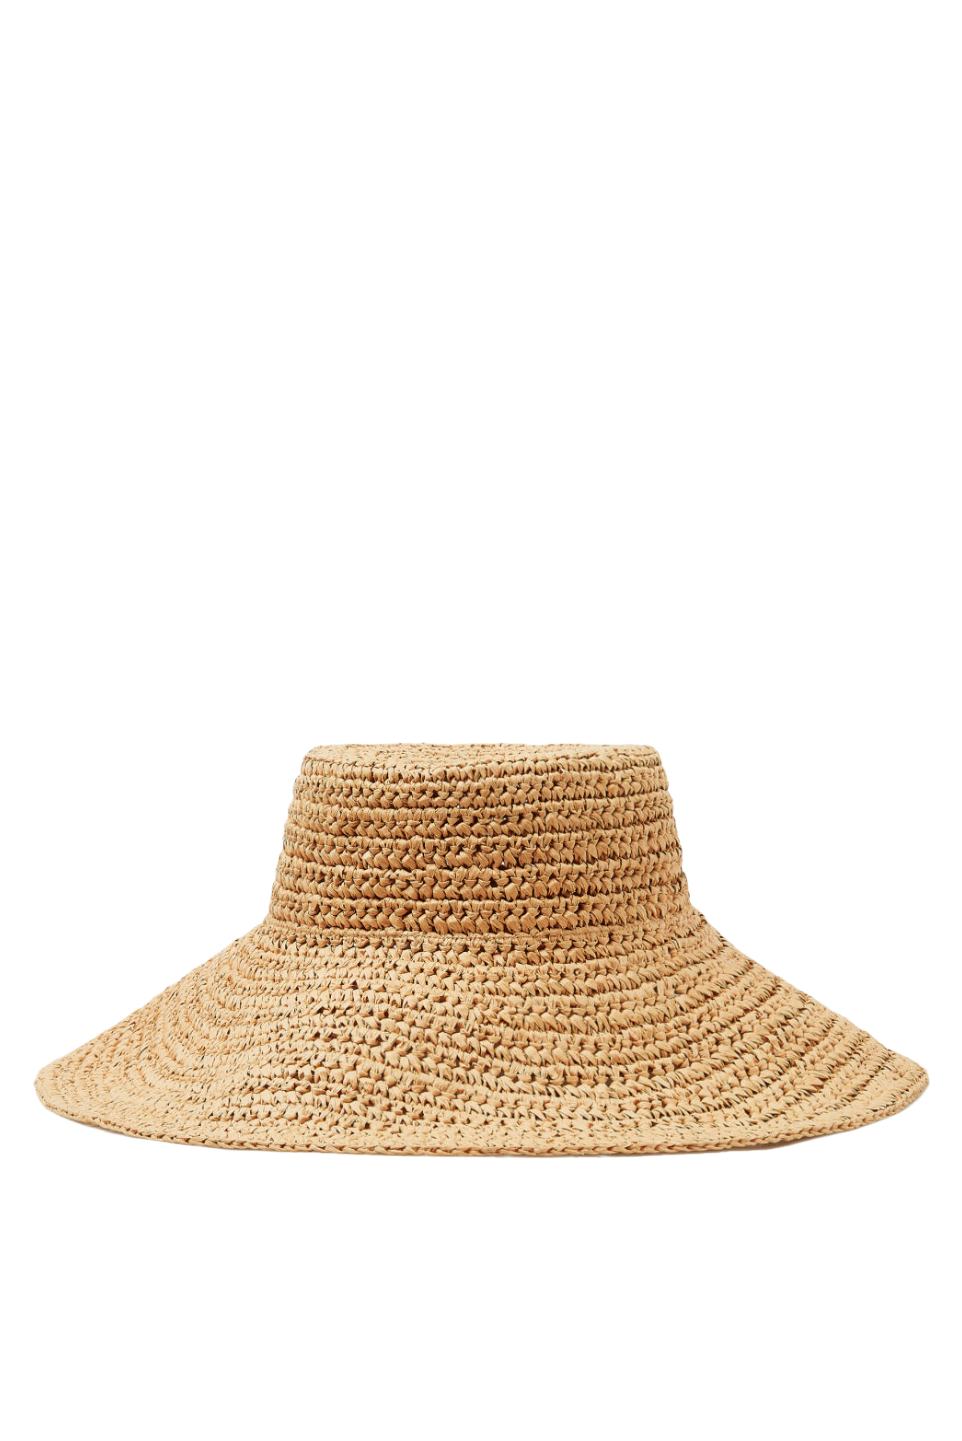 COS Woven Straw Hat